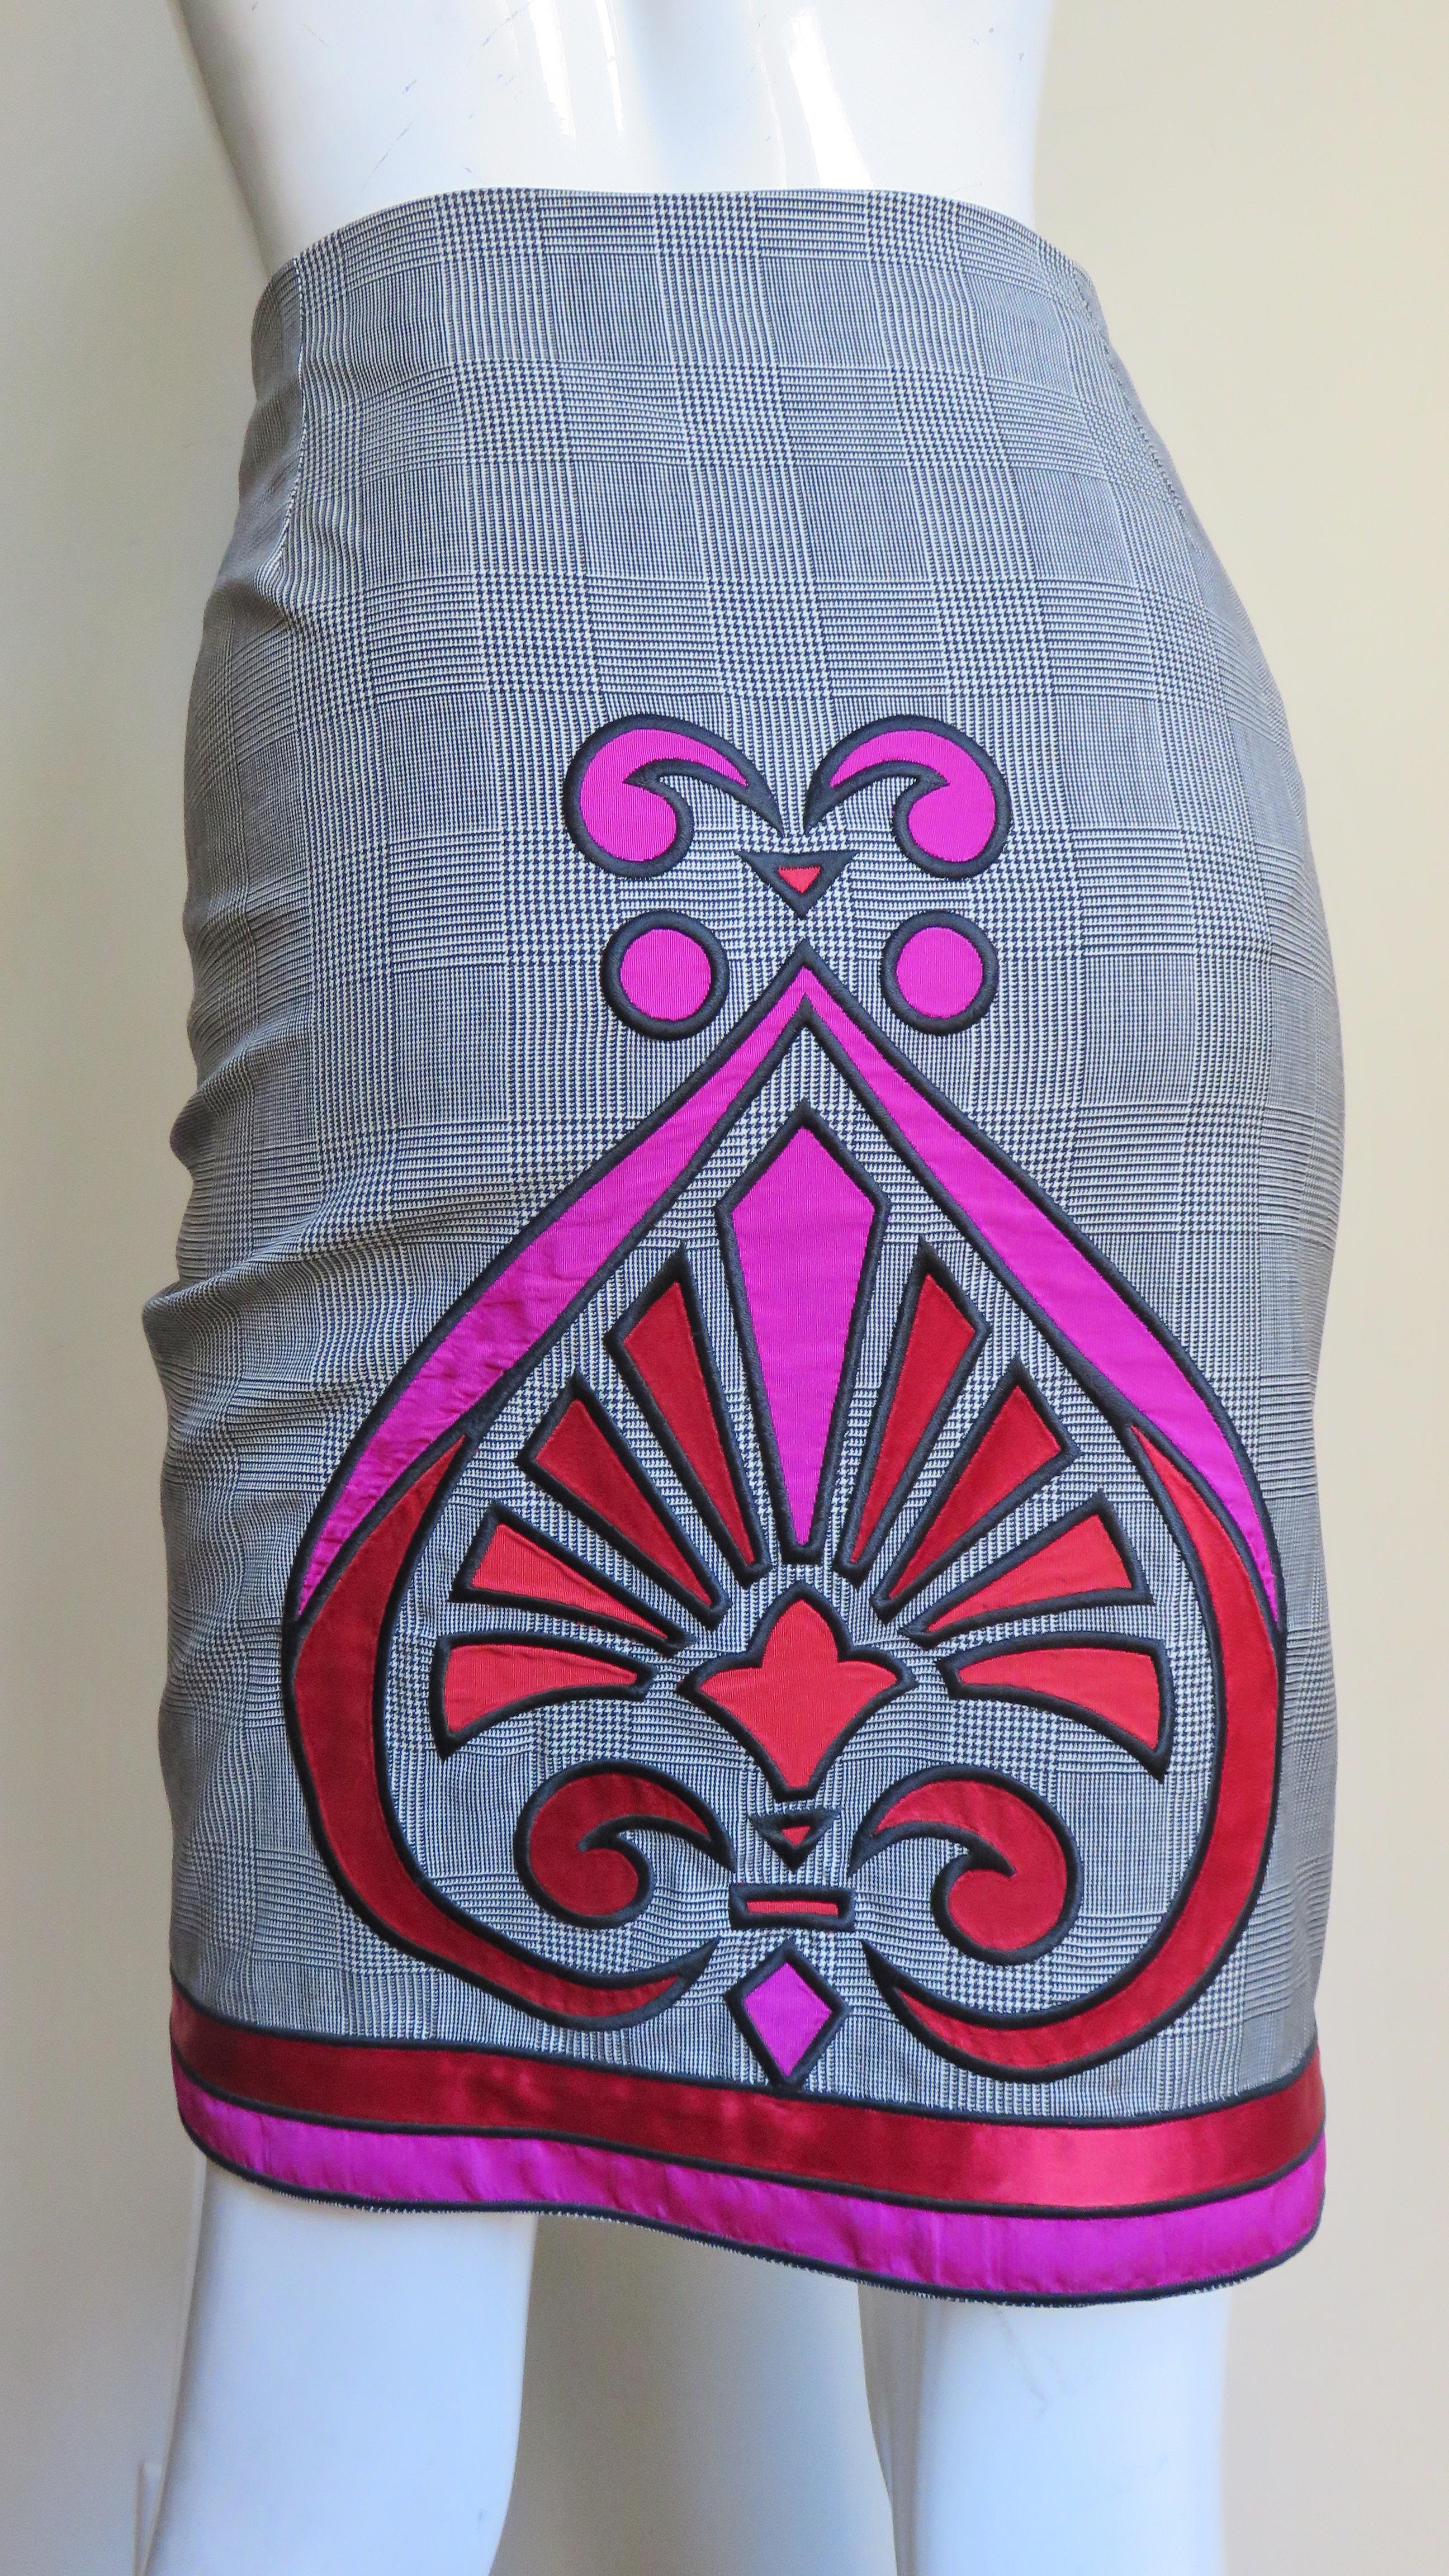 Gianni Versace Reversible Skirt with Elaborate Applique 1990s For Sale 5